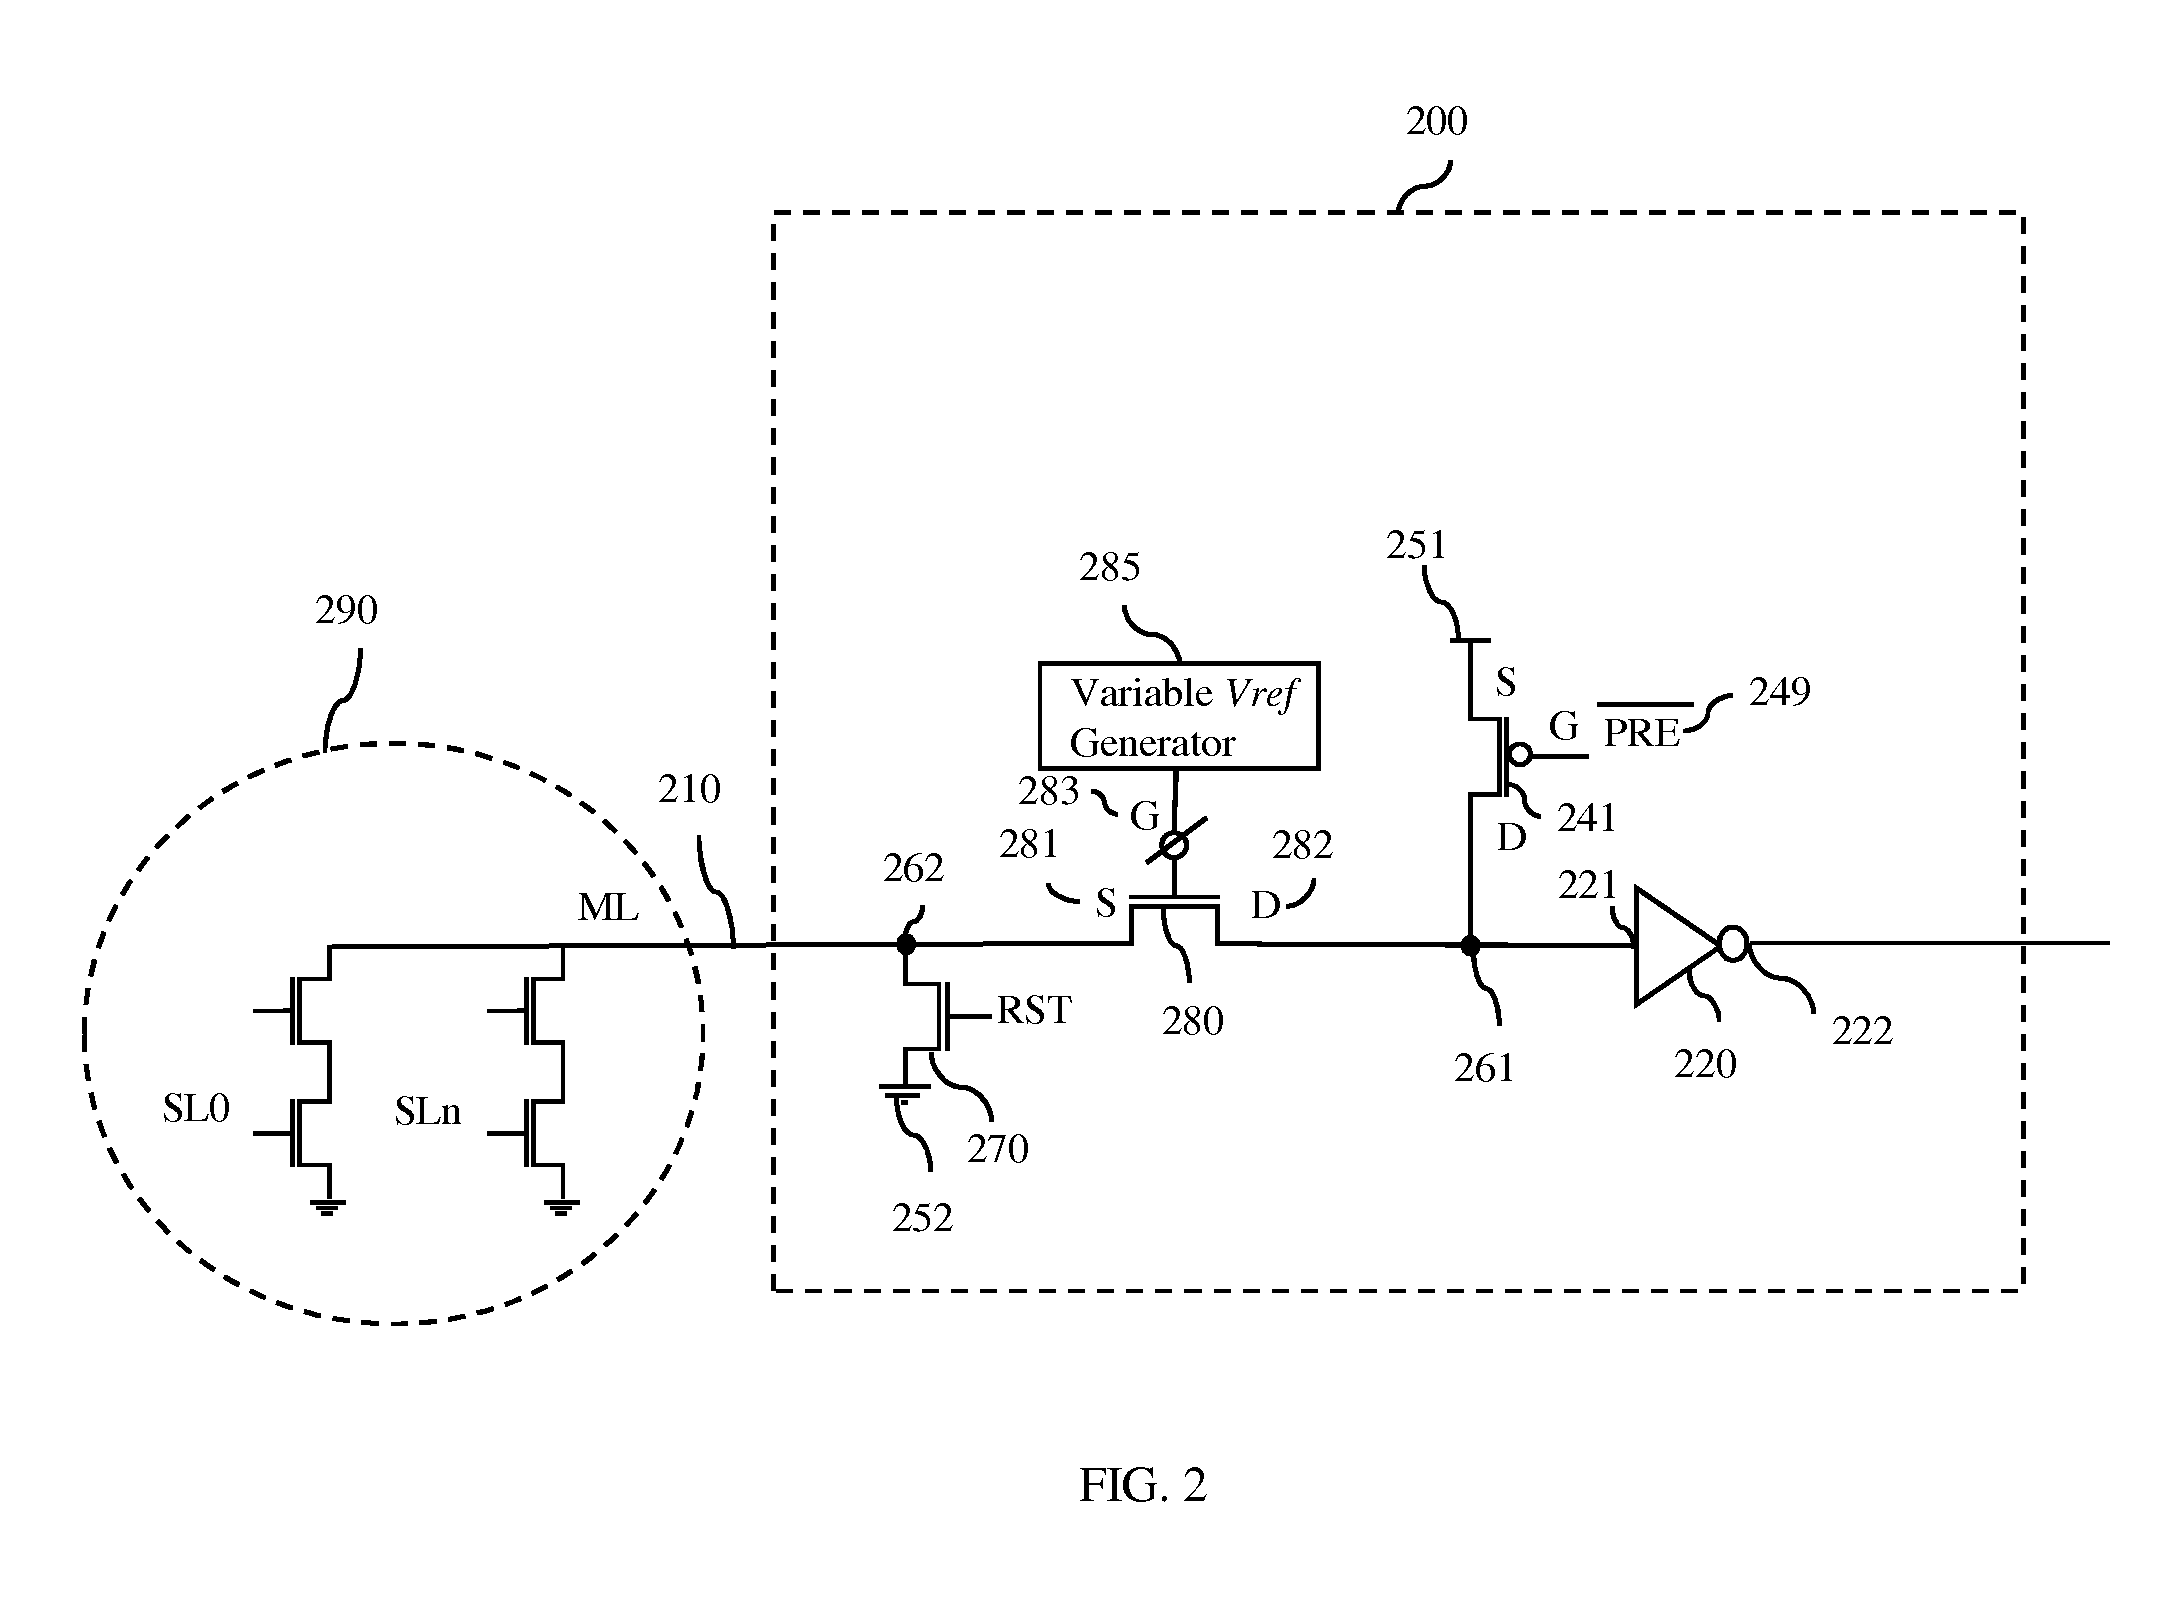 Single ended sensing circuits for signal lines